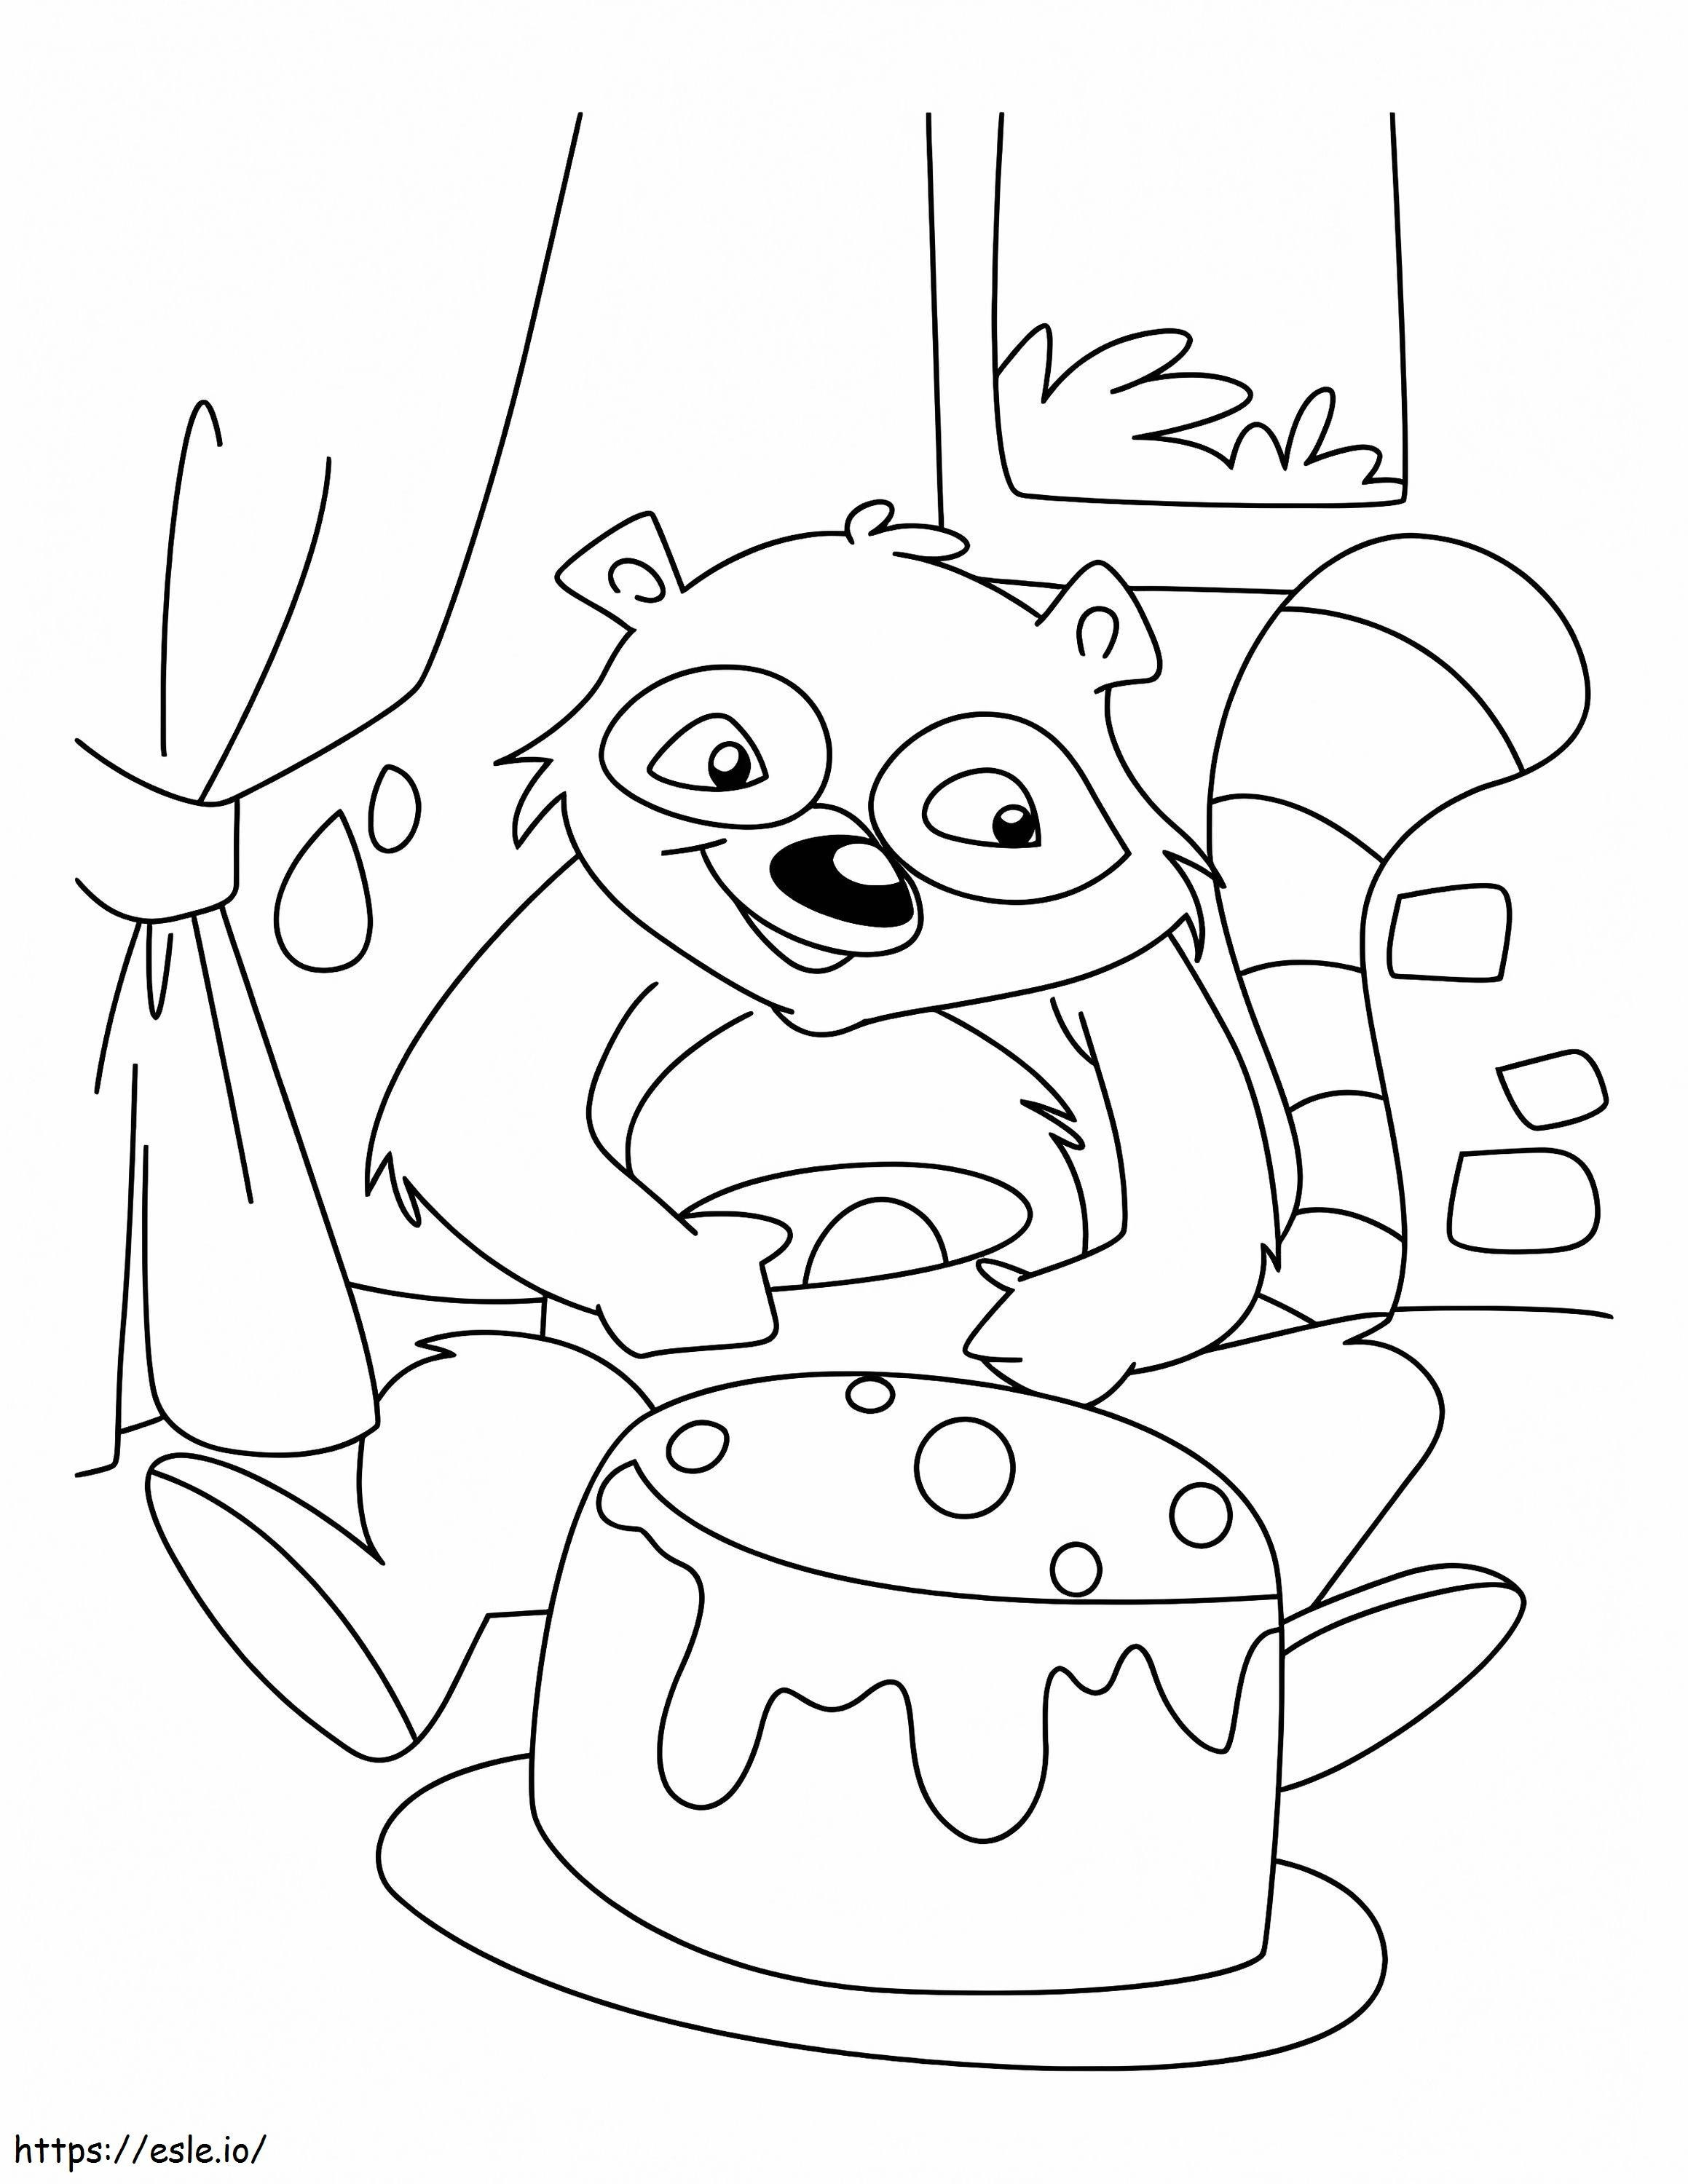 Raccoon Celebrating His Birthday coloring page